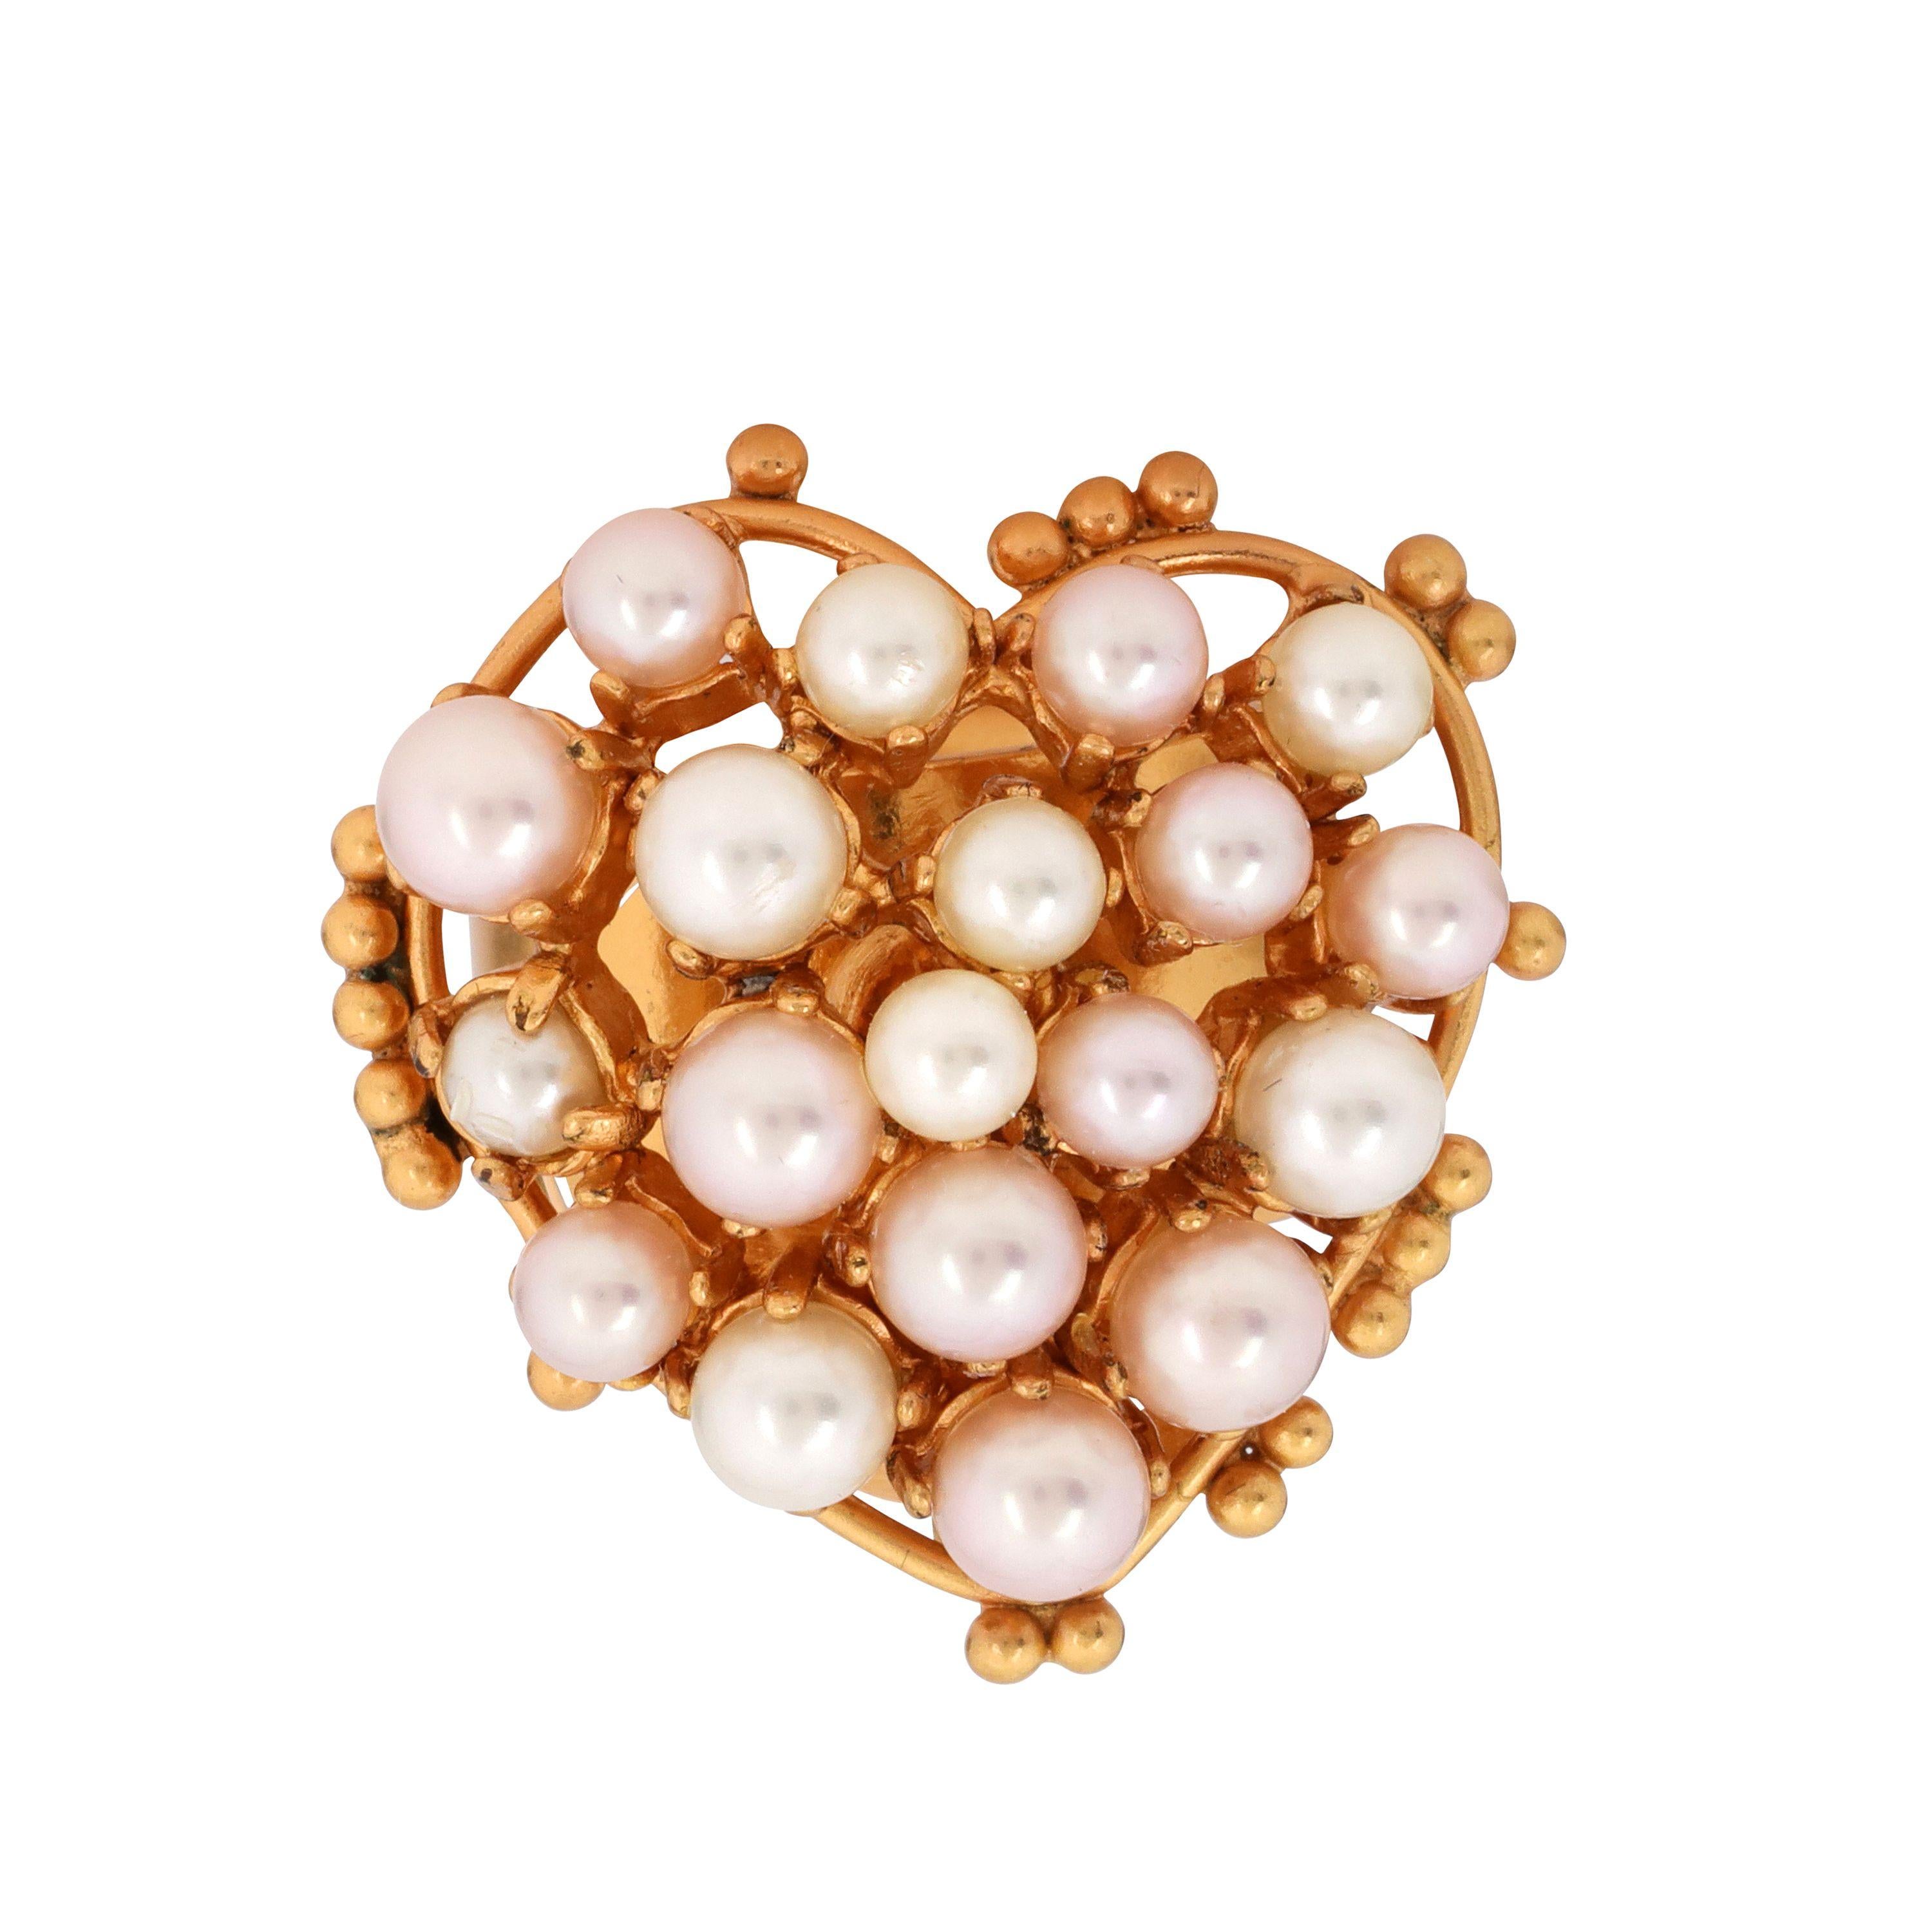 This authentic Chanel Gold Pearl Heart Ring is in excellent condition.  From the Spring 2002 Collection.  Size 6.  Faux pearls in a heart shape with dangling CC charm.  Made in France. Box or pouch included.

ACO 13956
